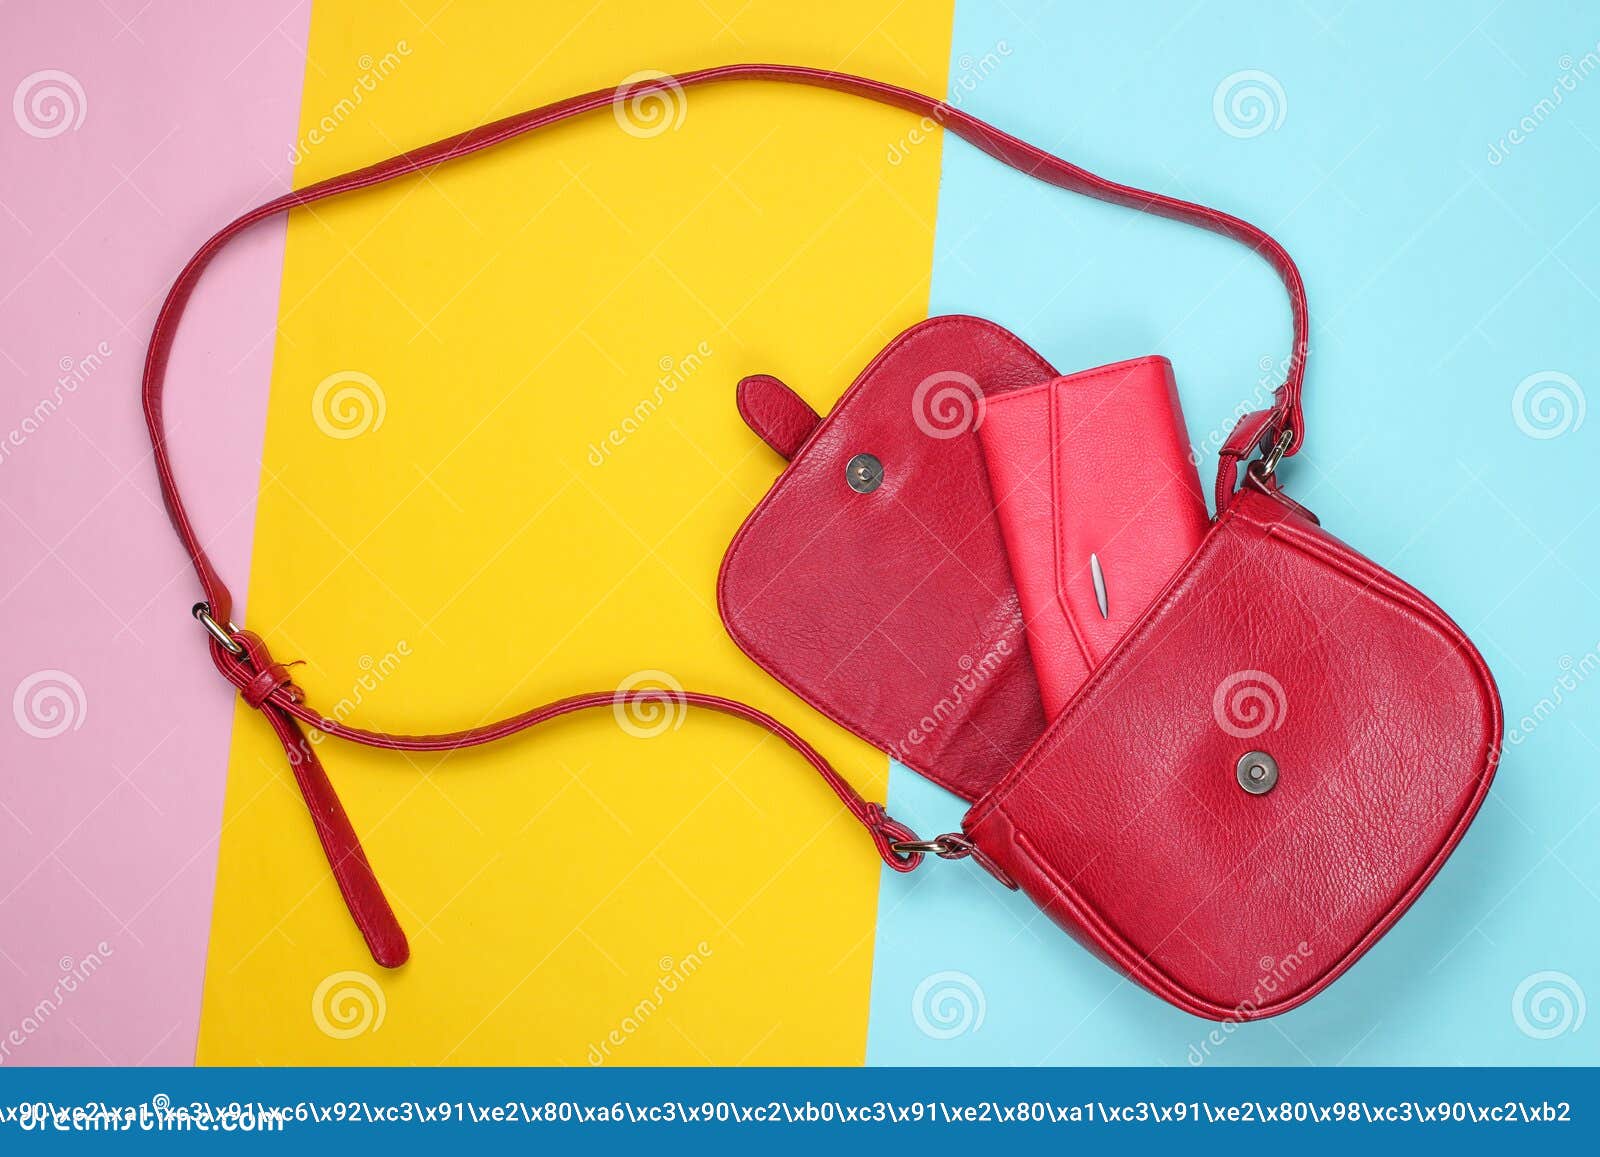 Red leather bag with purse stock photo. Image of female - 145422378